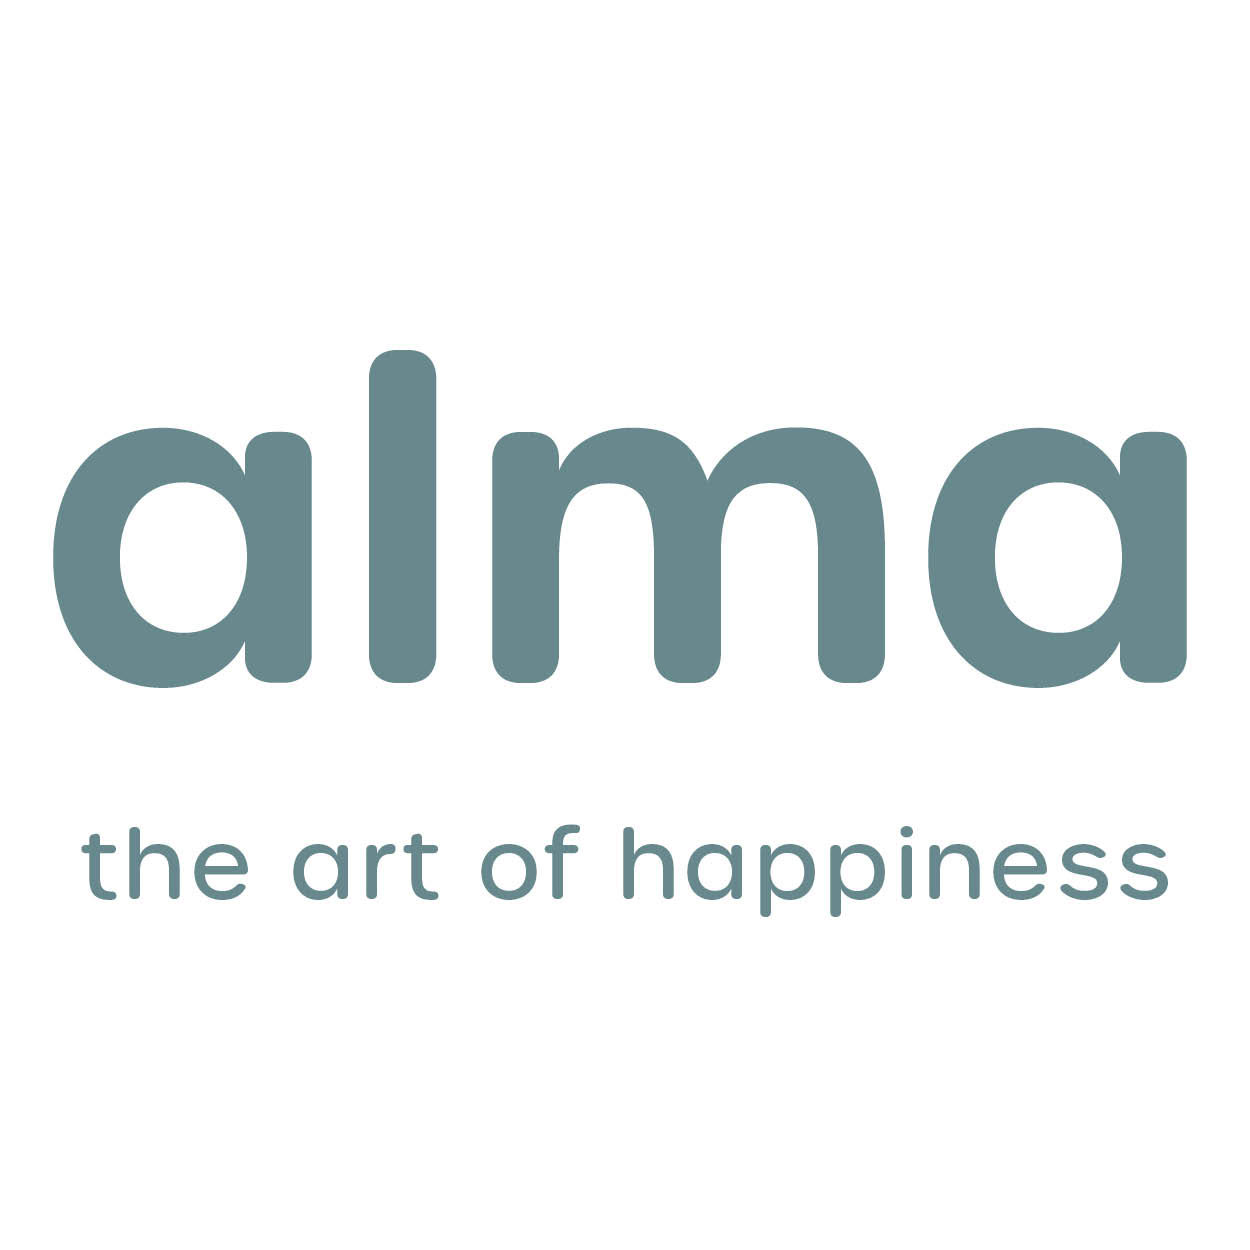 Alma - The art of happiness